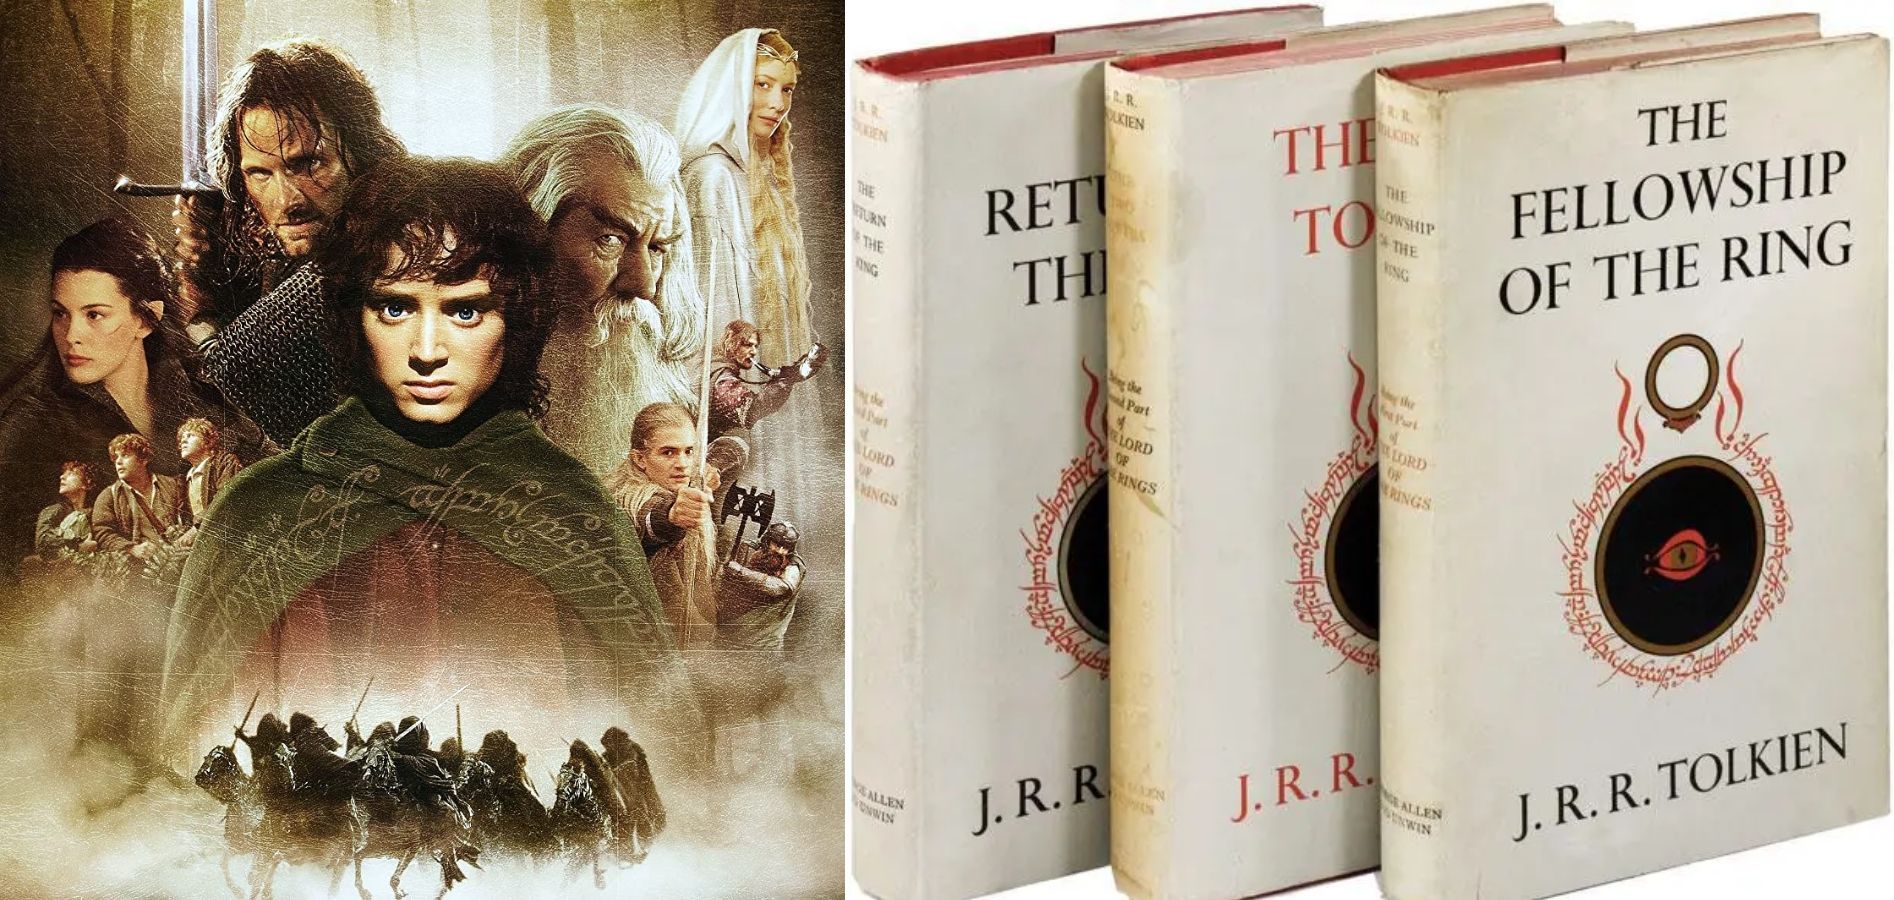 LOTR films and books